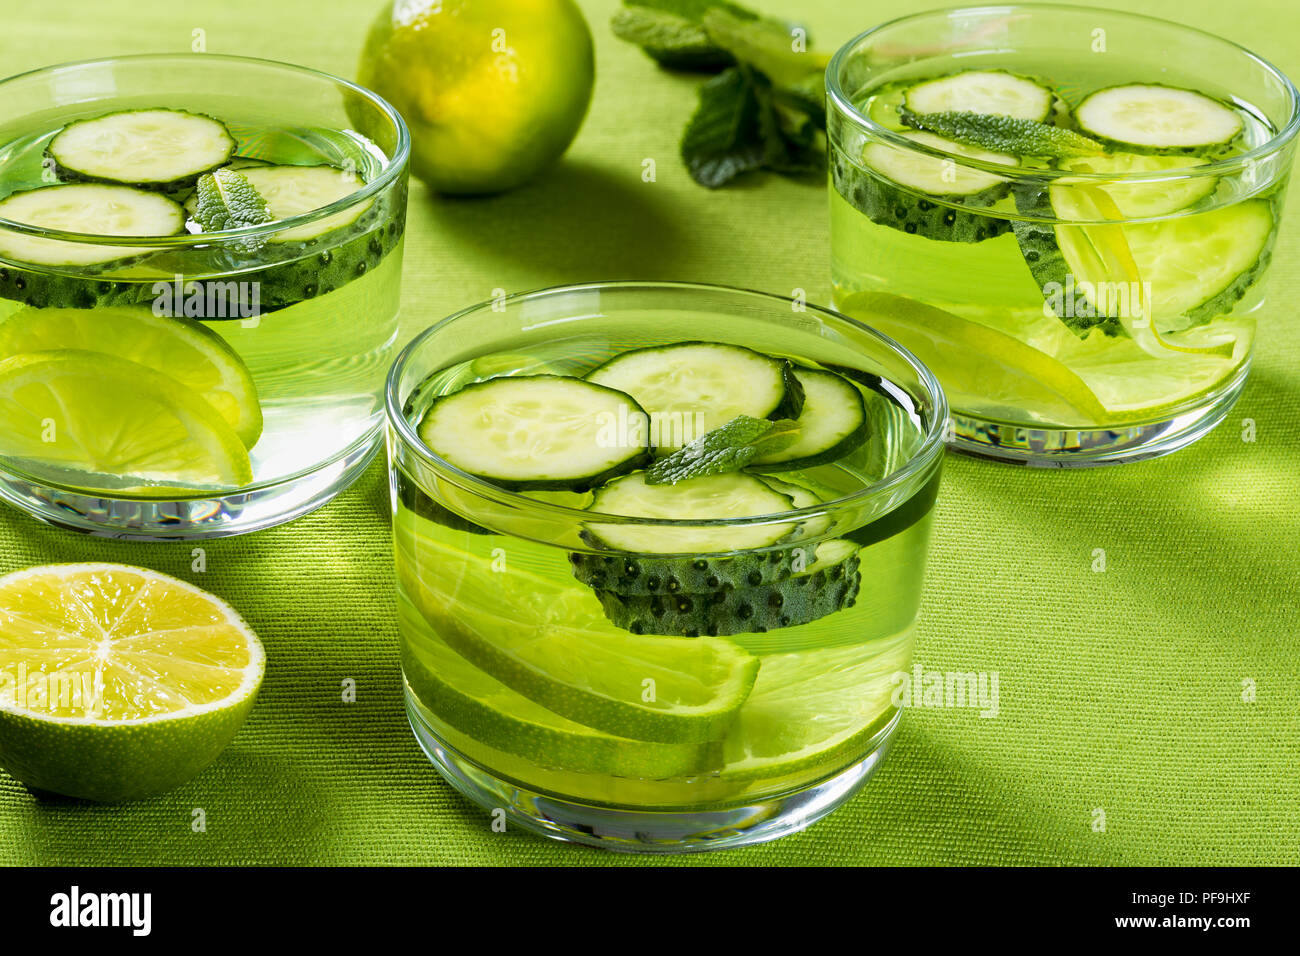 Very Fat Burning Detox Drink - Sassy Water: sliced cucumber, lime and mint in the three glasses on a green  table rib mat, close-up Stock Photo